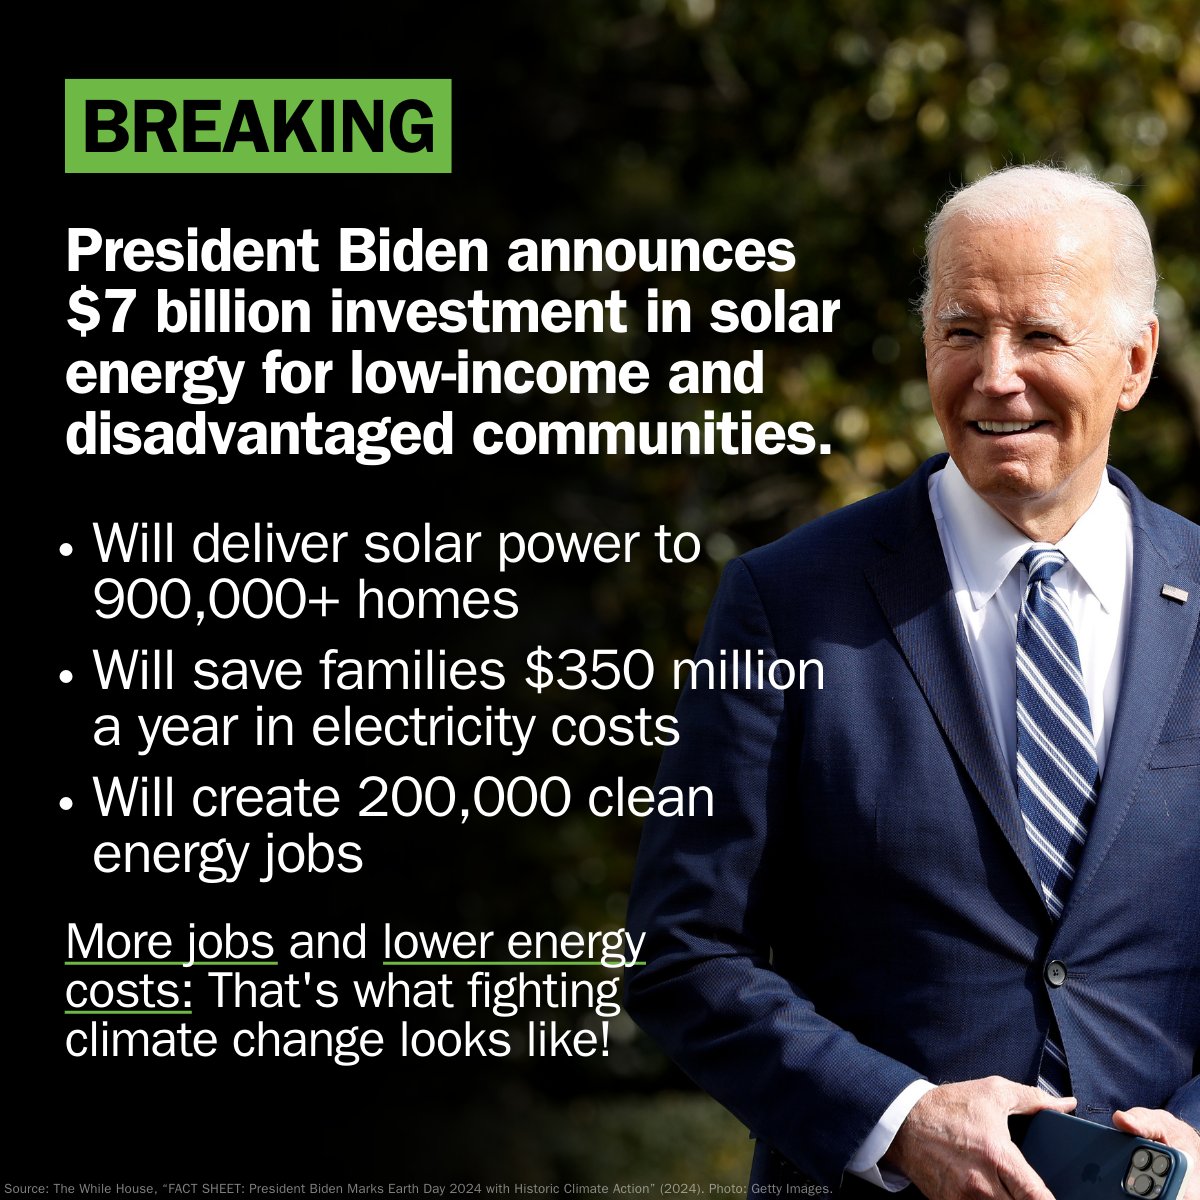 HUGE news that will create jobs and lower the cost of solar for American families.